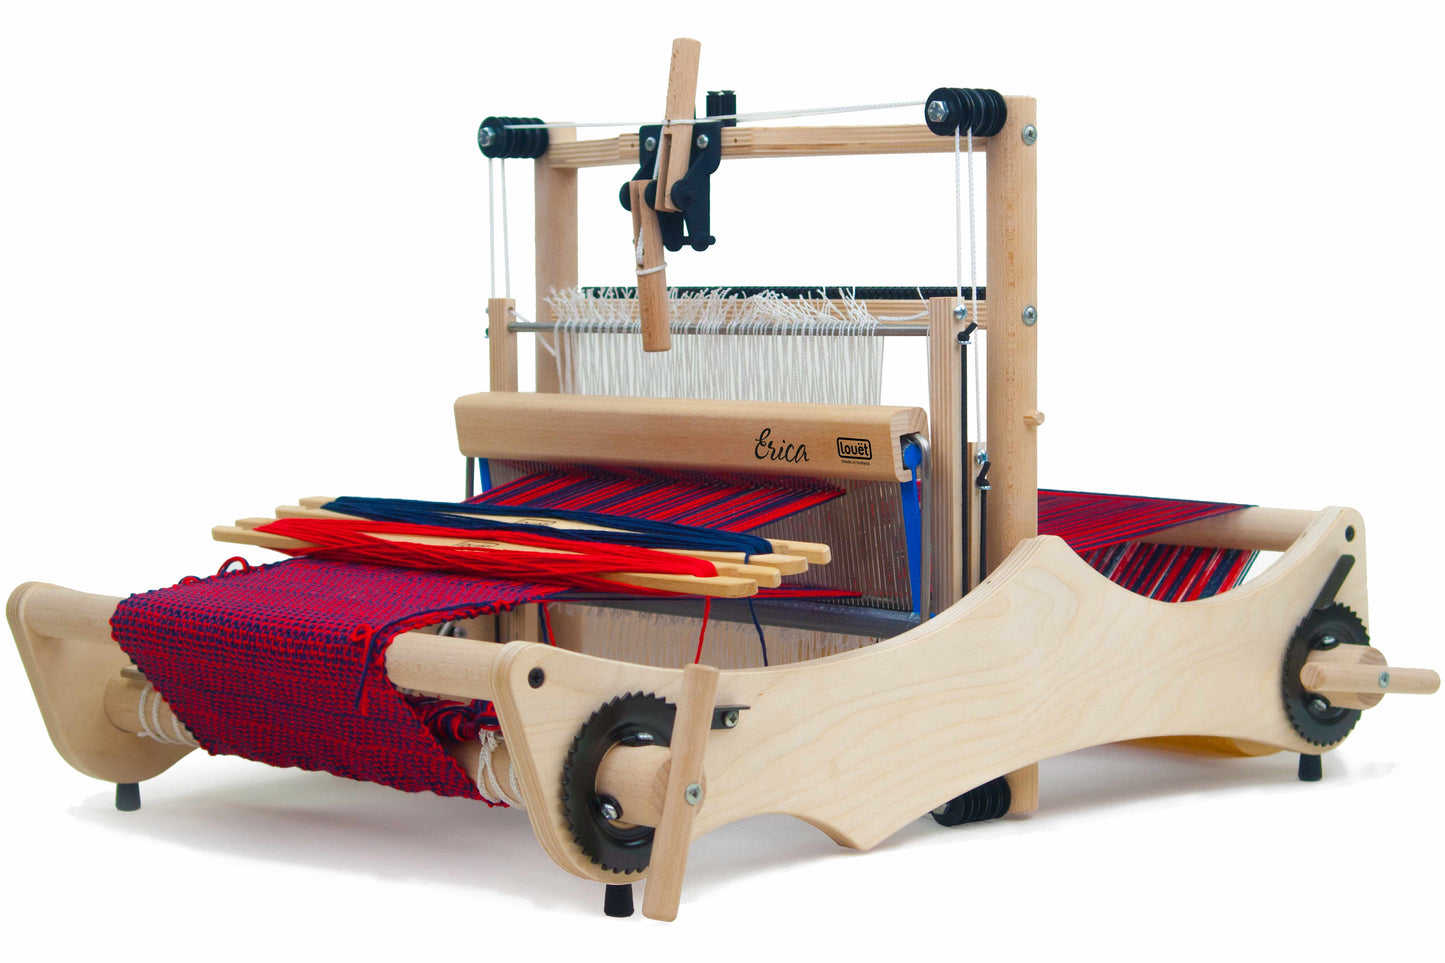 Louet Erica Table Loom - FREE Shipping